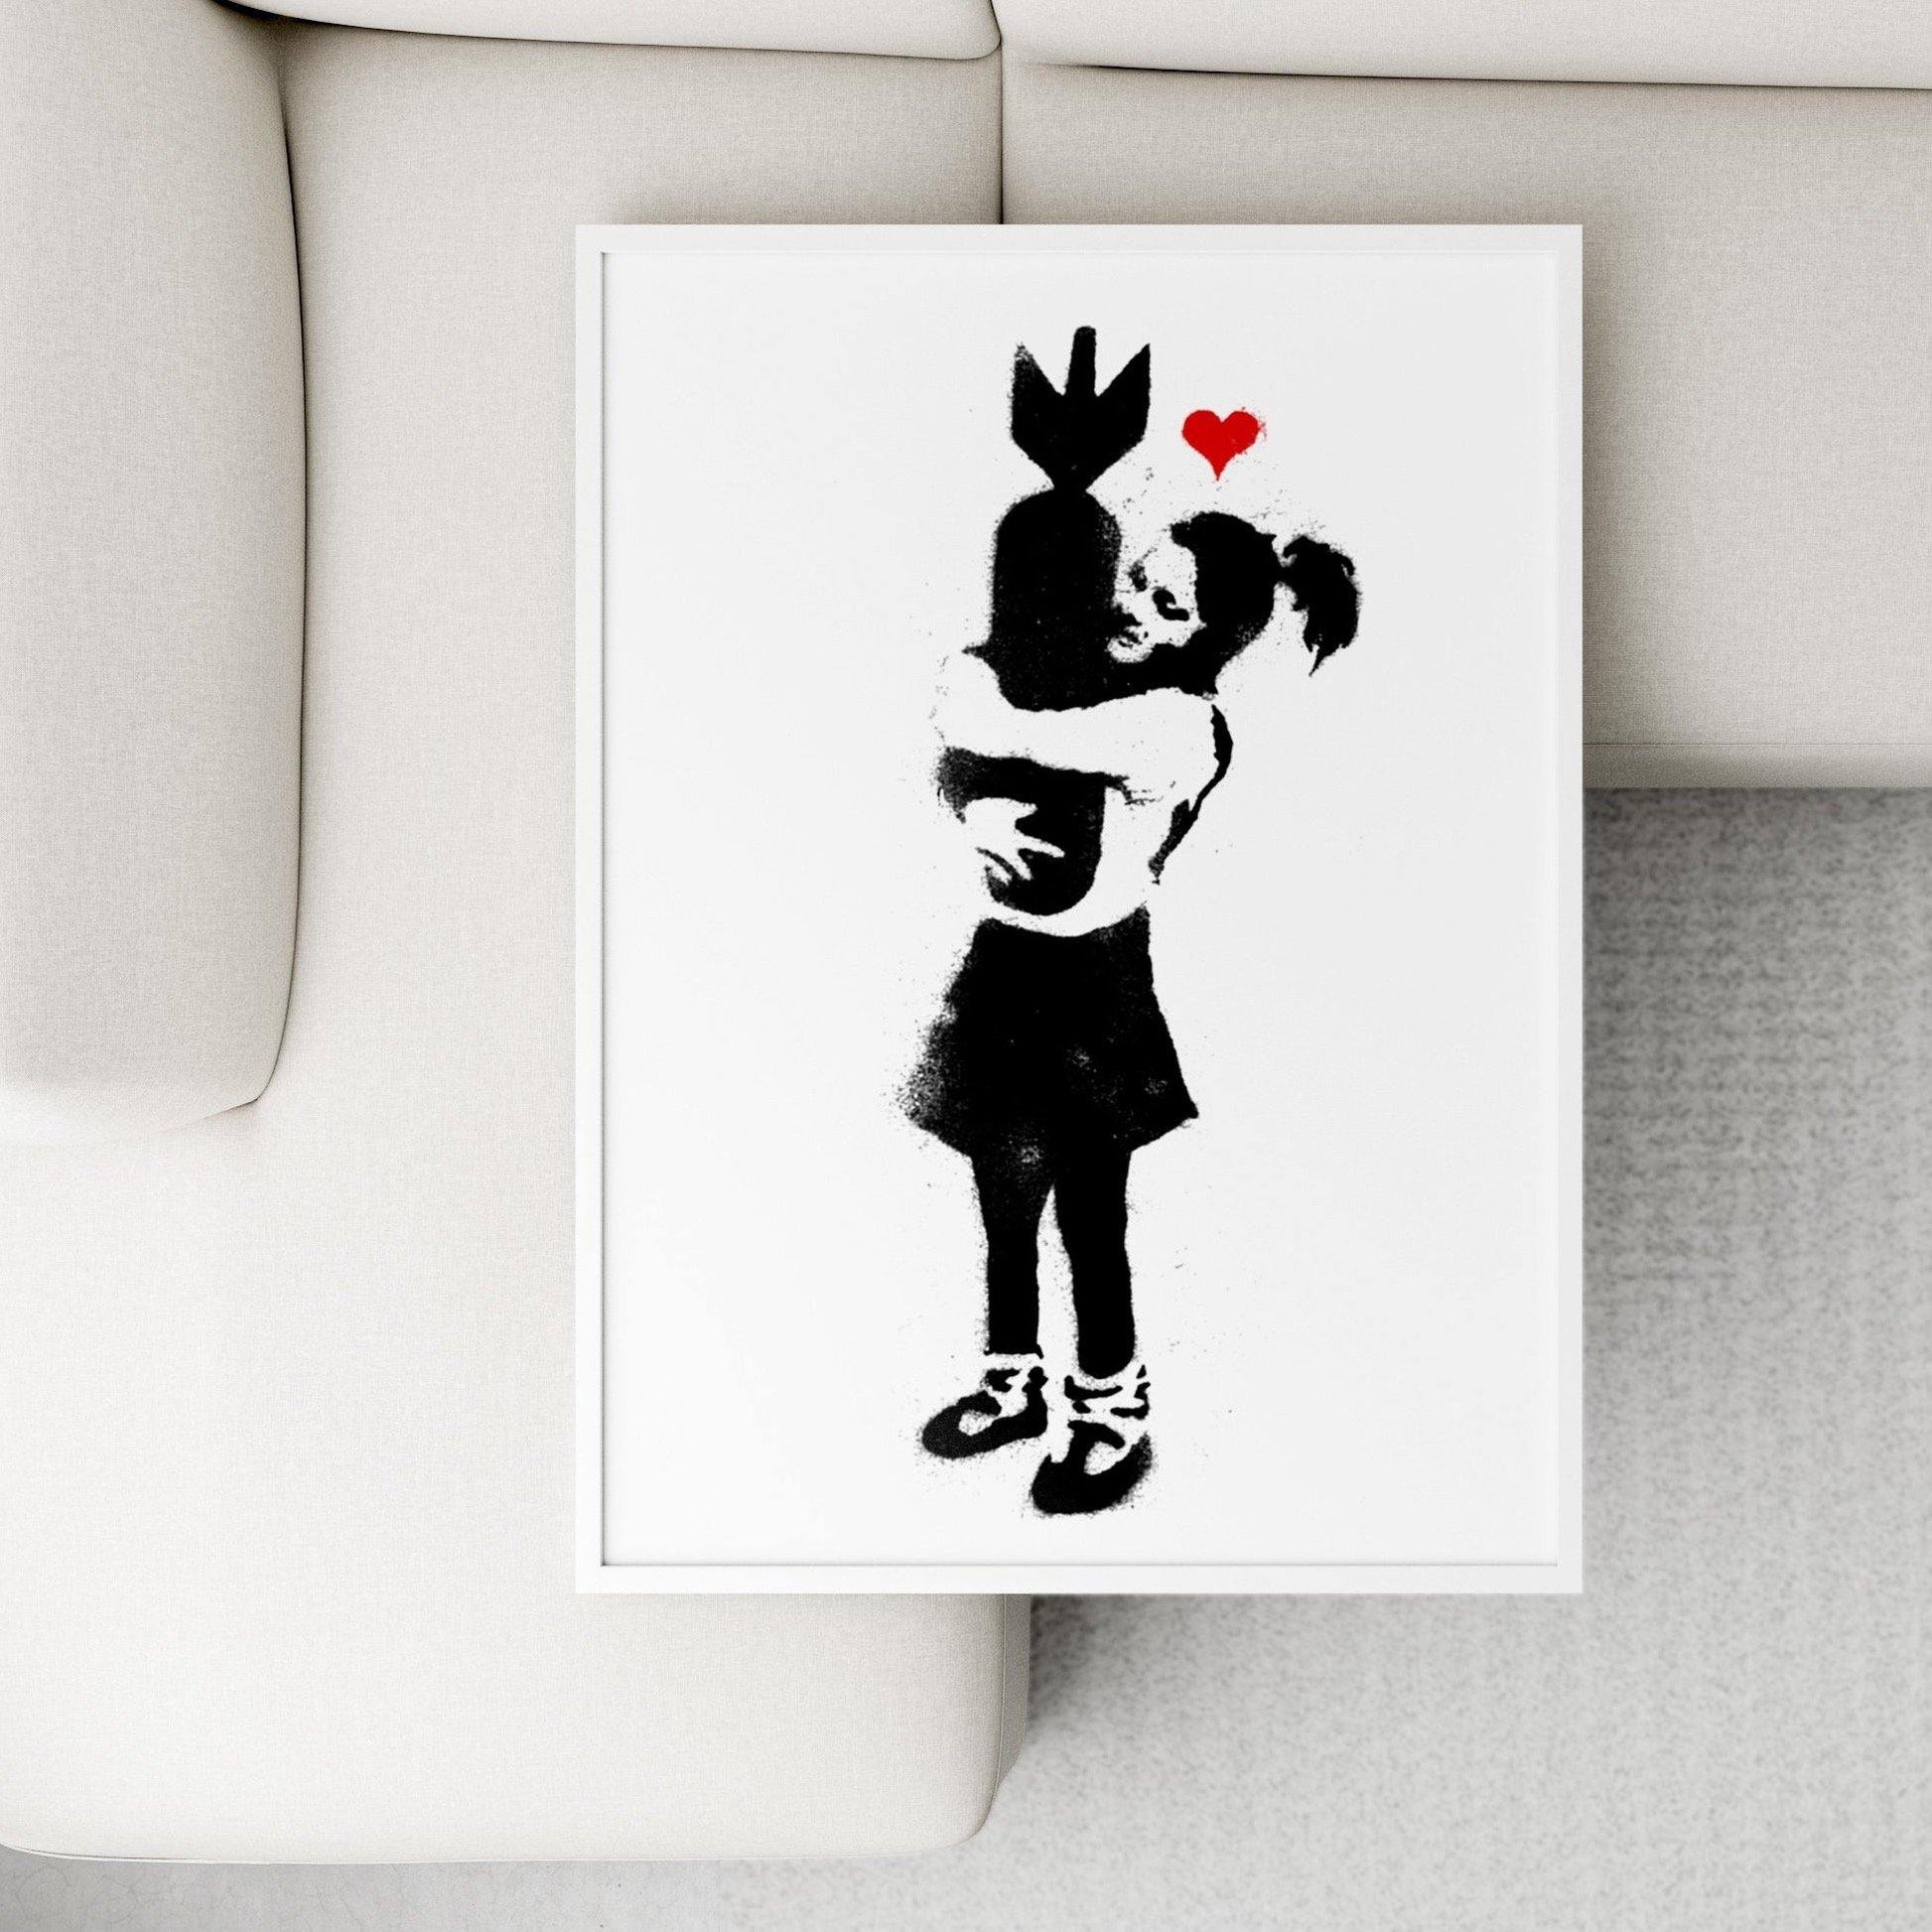 Bored of the same old art? Check out our latest design. With a street art twist, our Hugging Bomb design will add some life to your walls. Printed on high quality paper, this poster is perfect for any street art enthusiast.